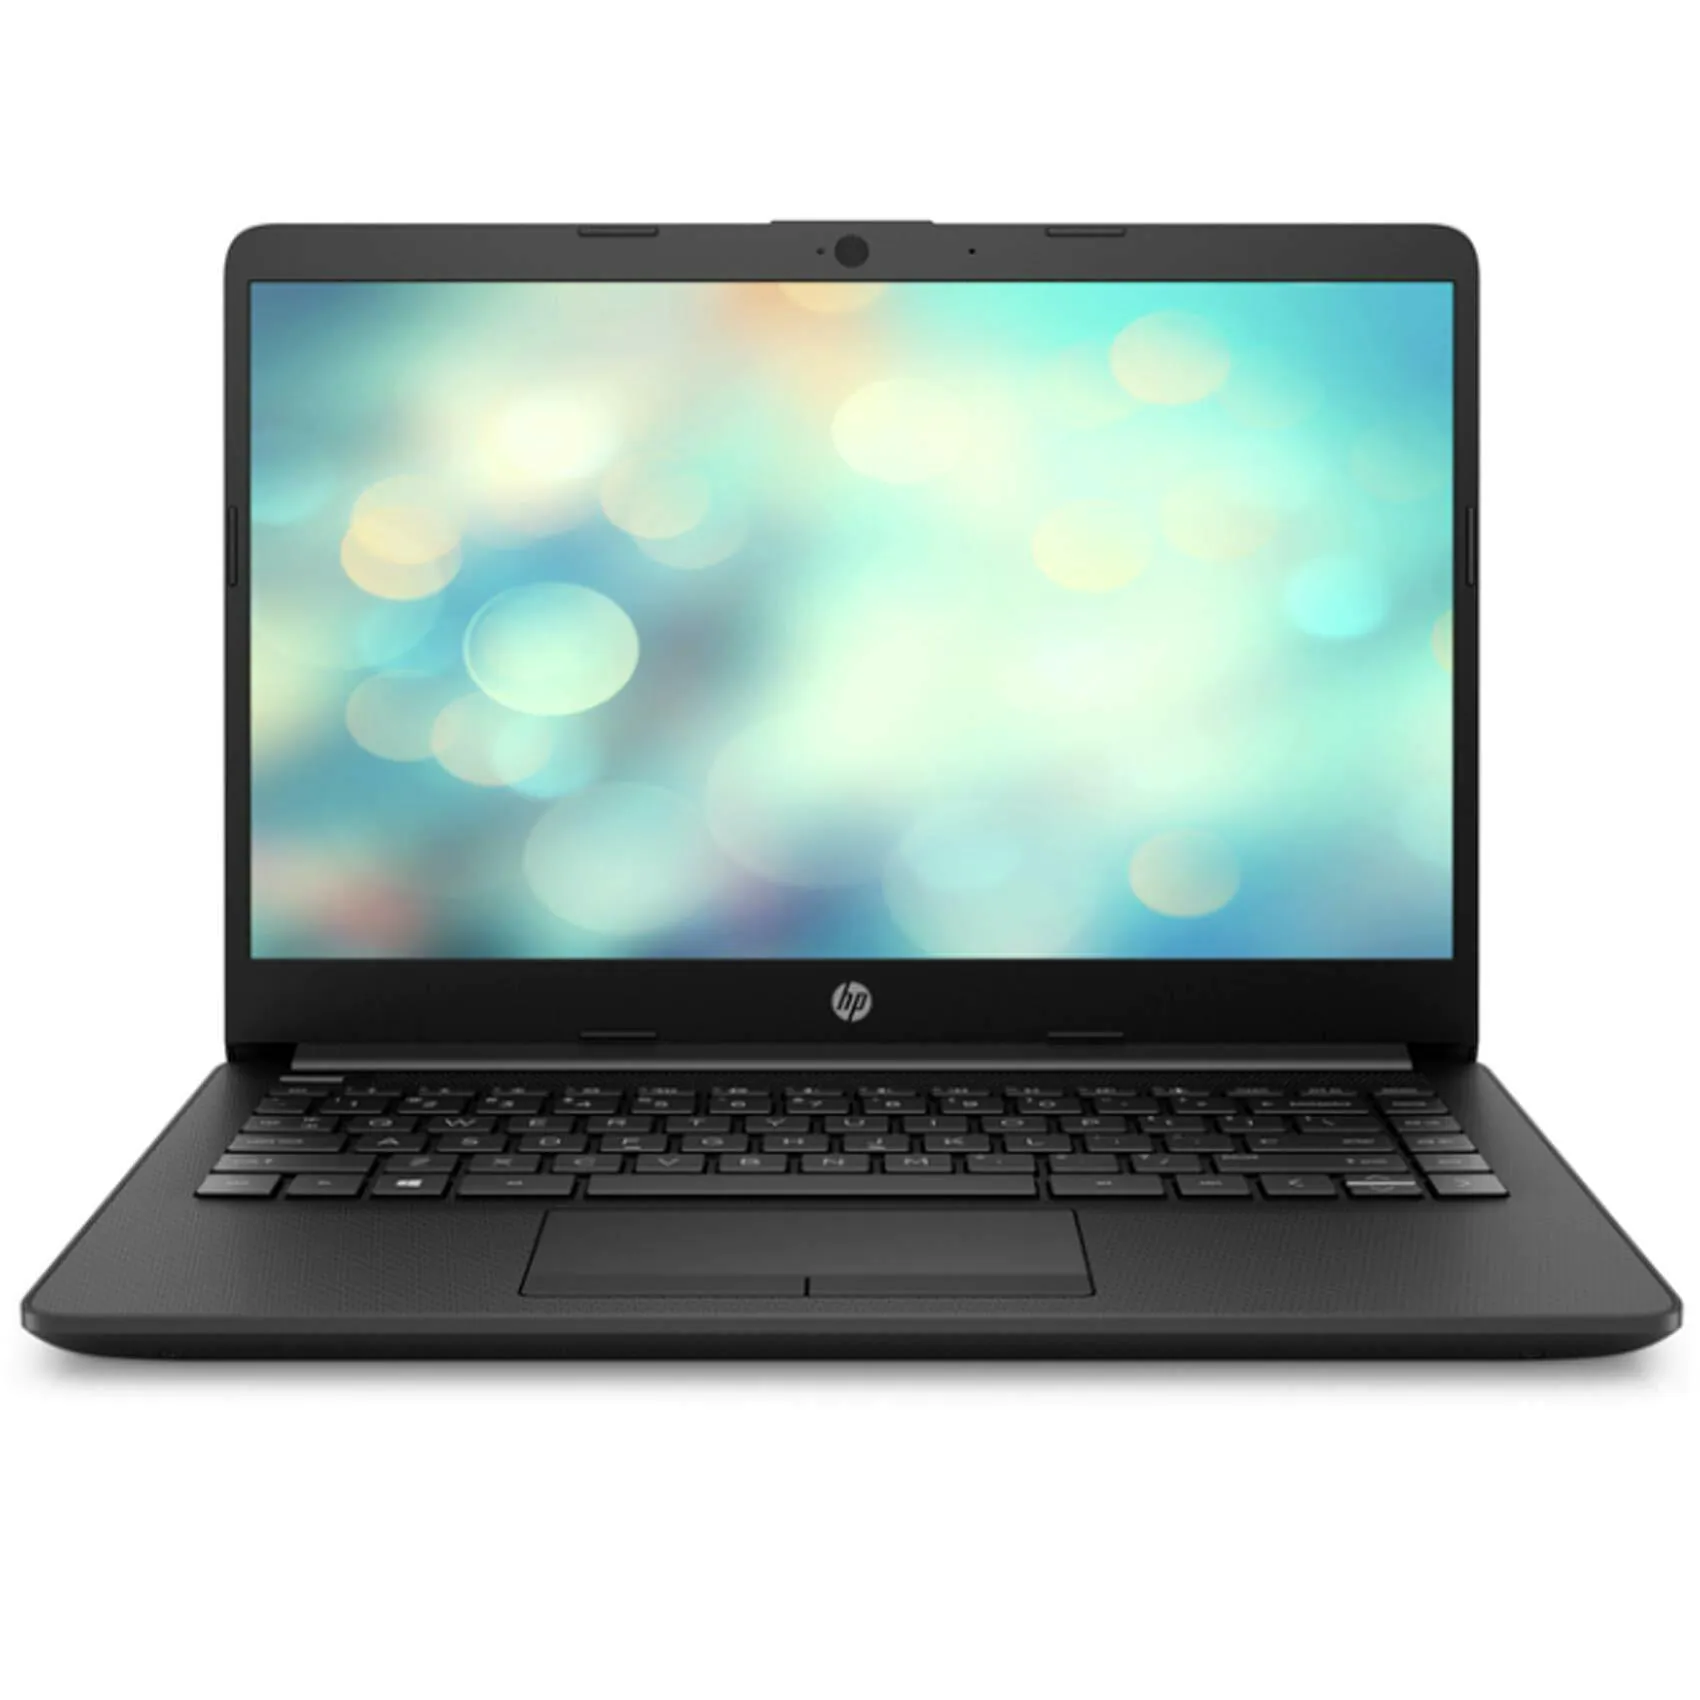 Laptops Promotions offer - in Amman #2050 - 1  image 